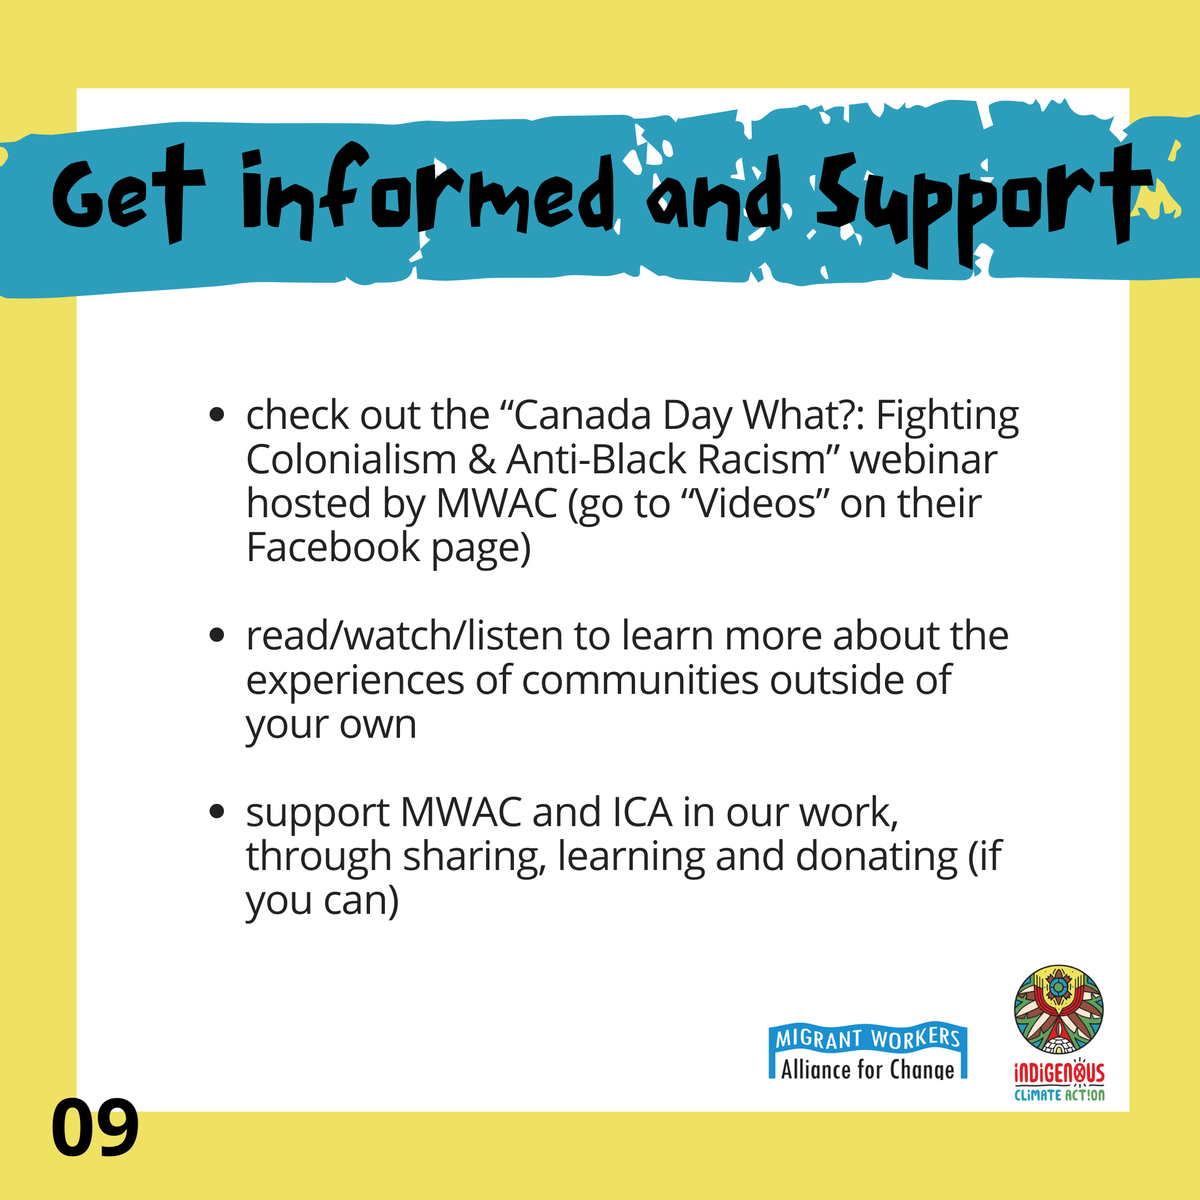 Get informed and support! (9/9)